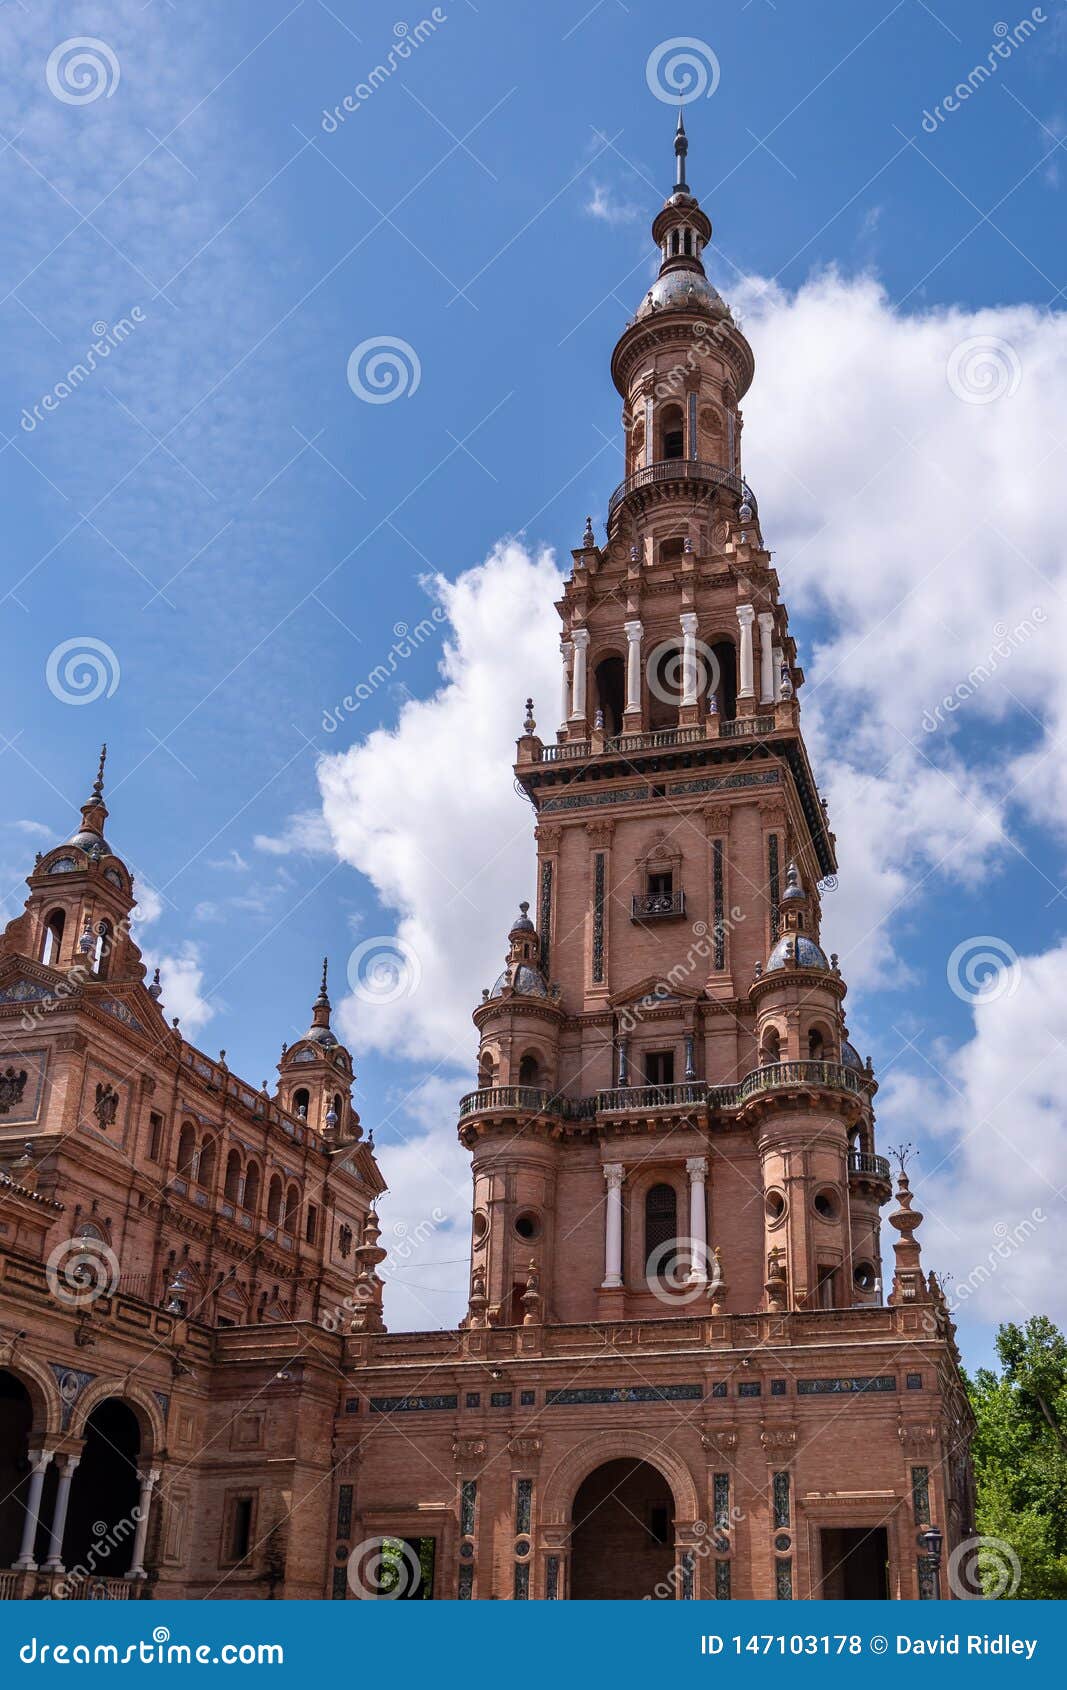 the plaza de espania is a square located in the park in seville built in 1928